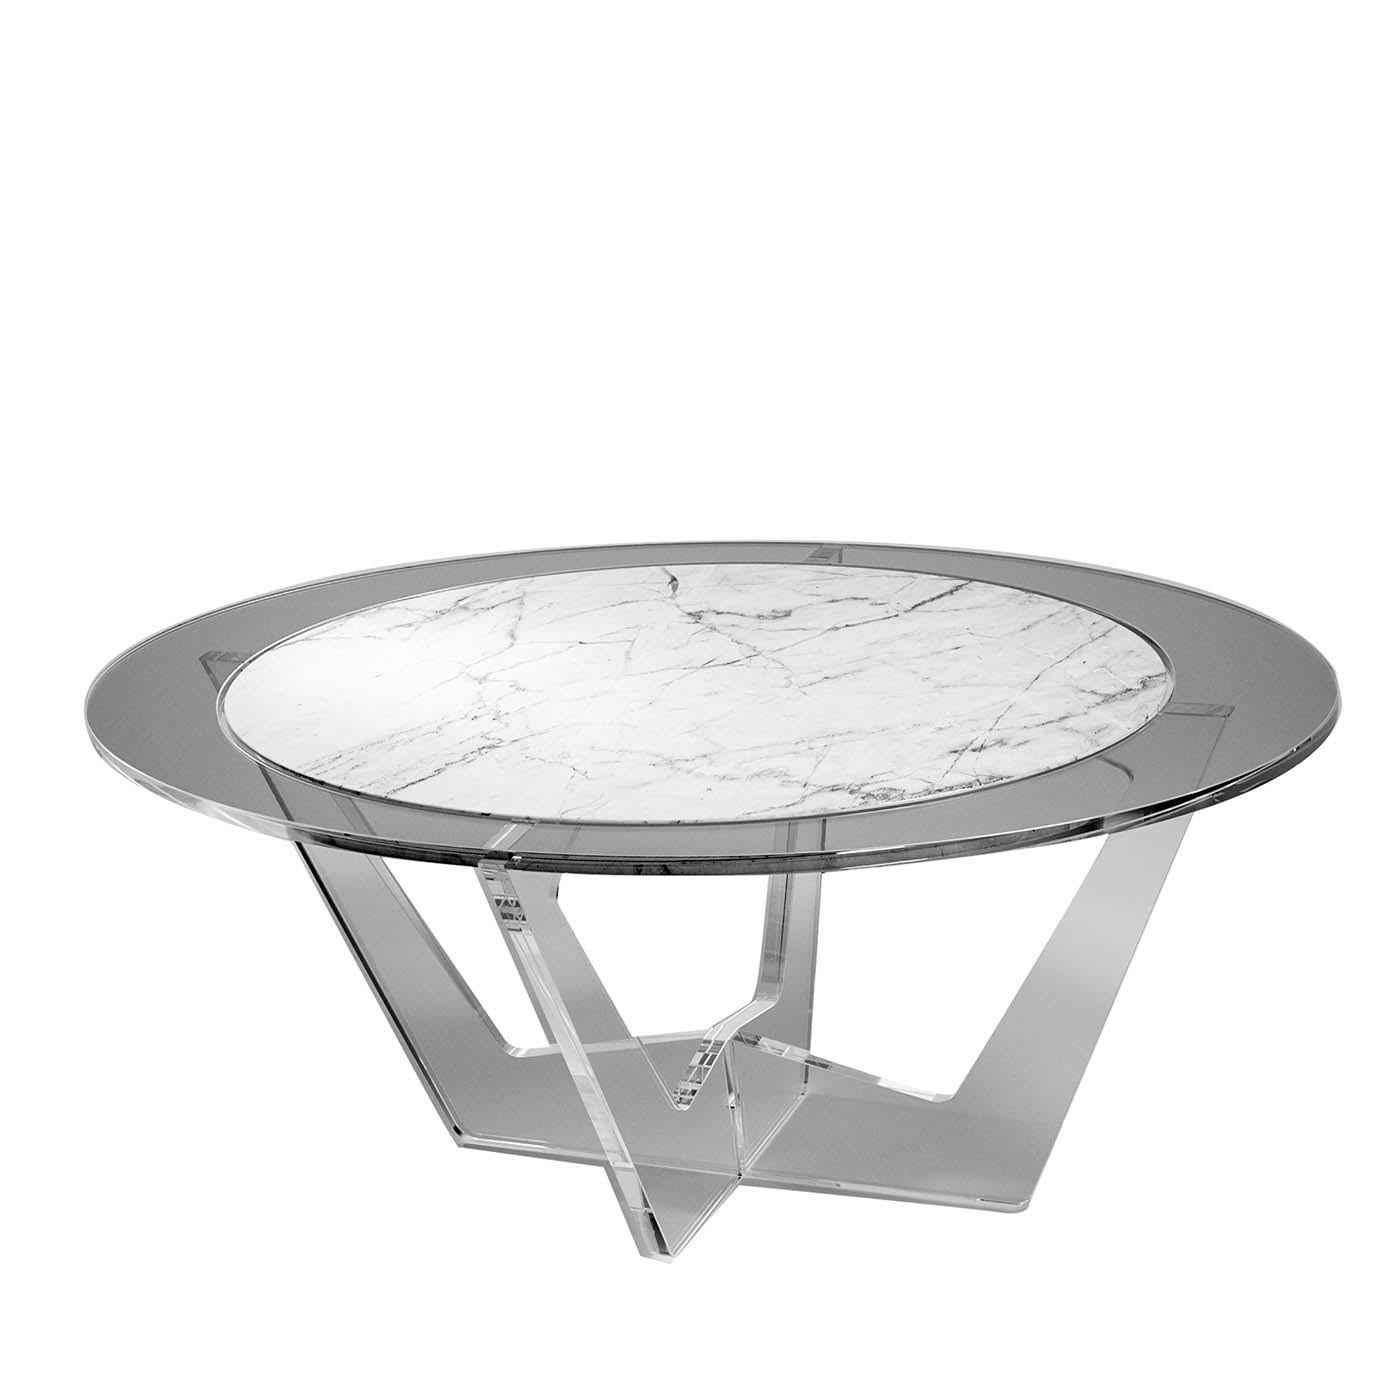 Modern Hac Gray Oval Coffee Table with White Carrara Marble Top by Madea Milano